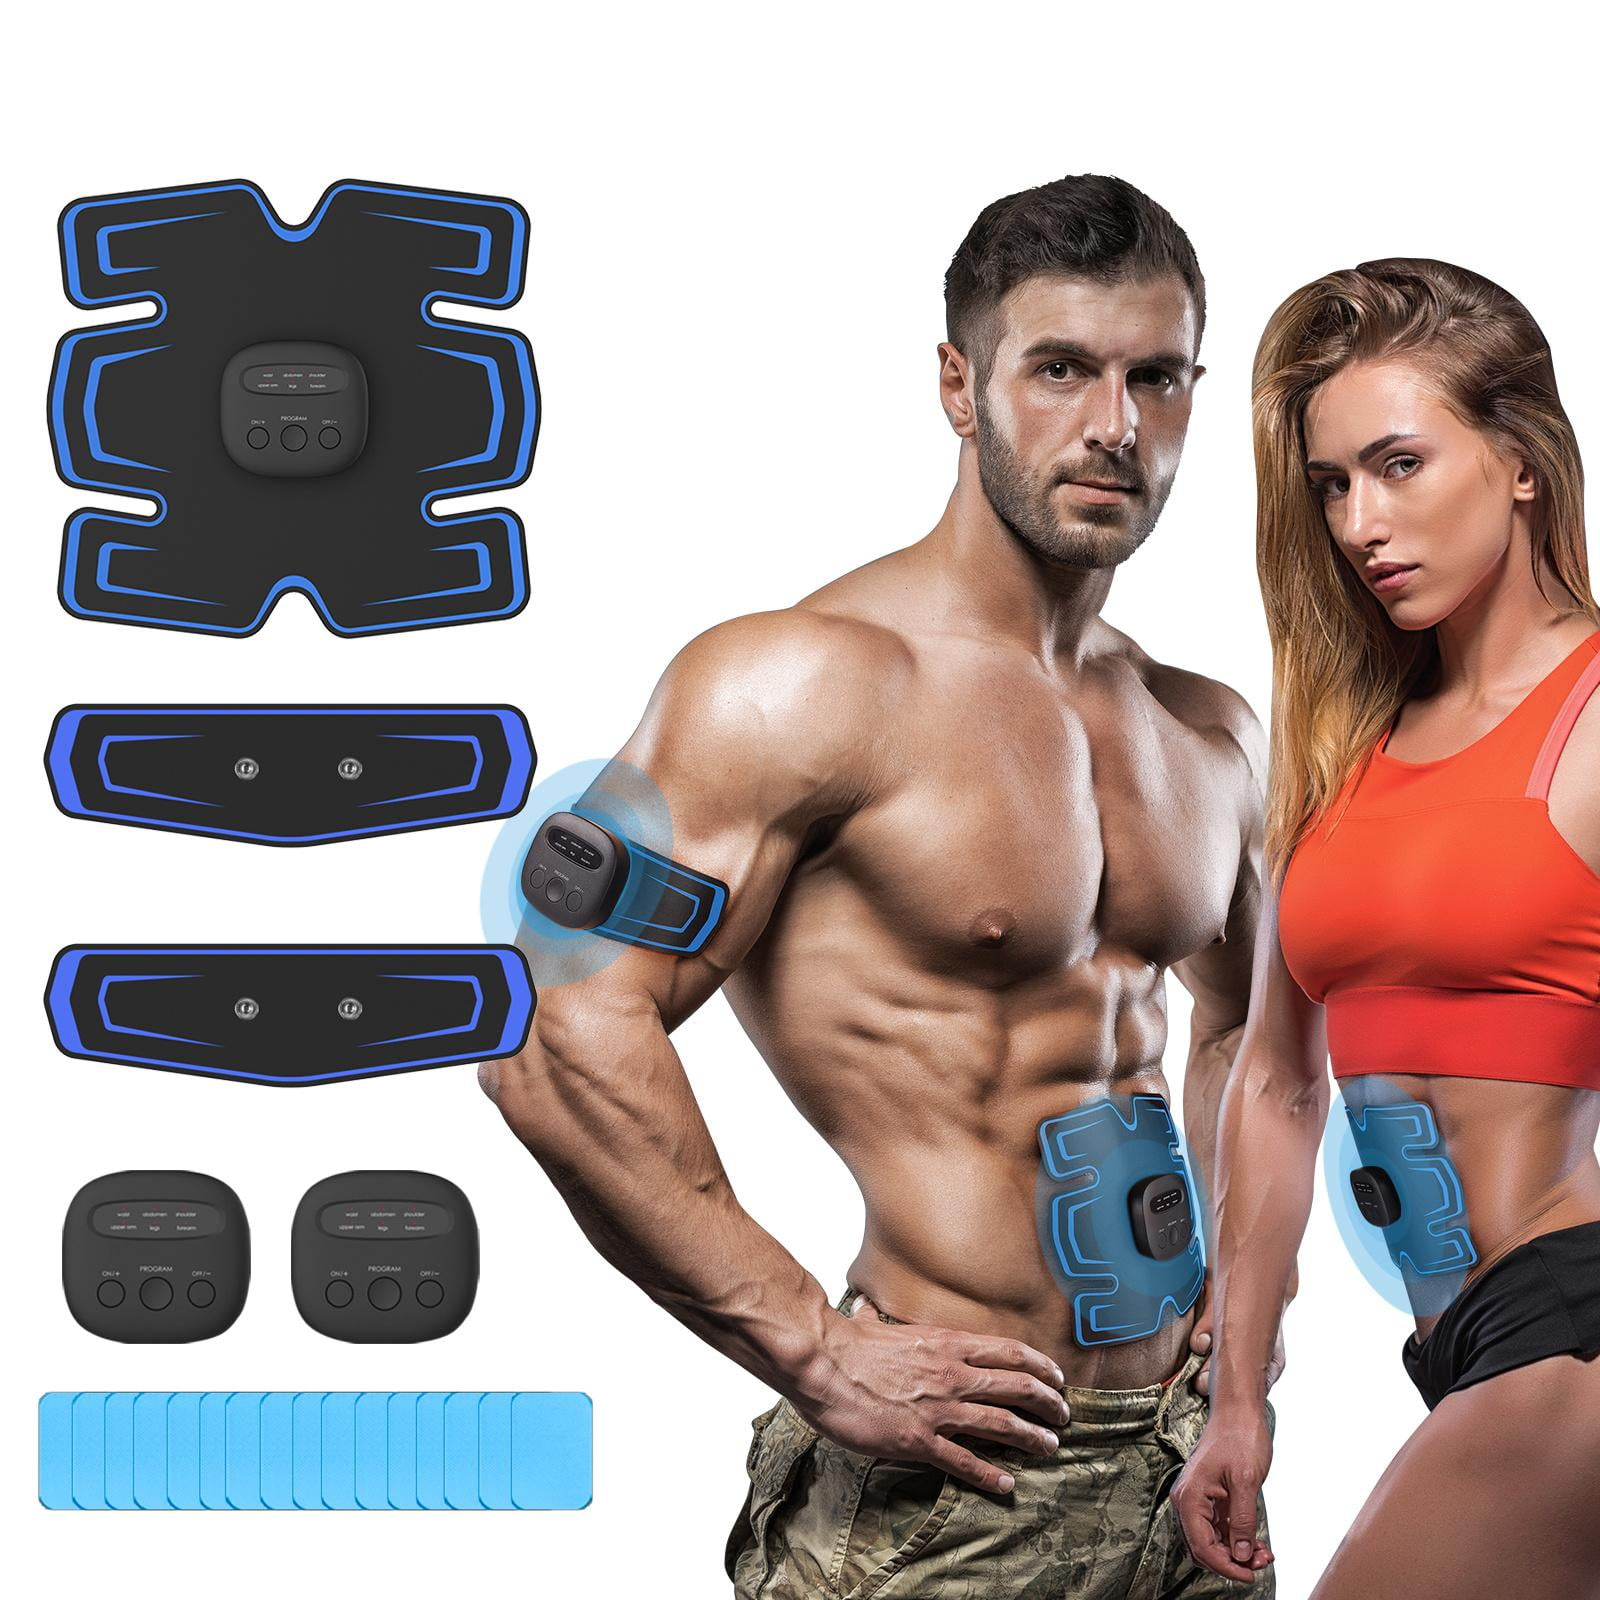 Details about   Rechargeable Abdominal Muscle Stimulator Trainer EMS Abs Fitness Excersize Gear 